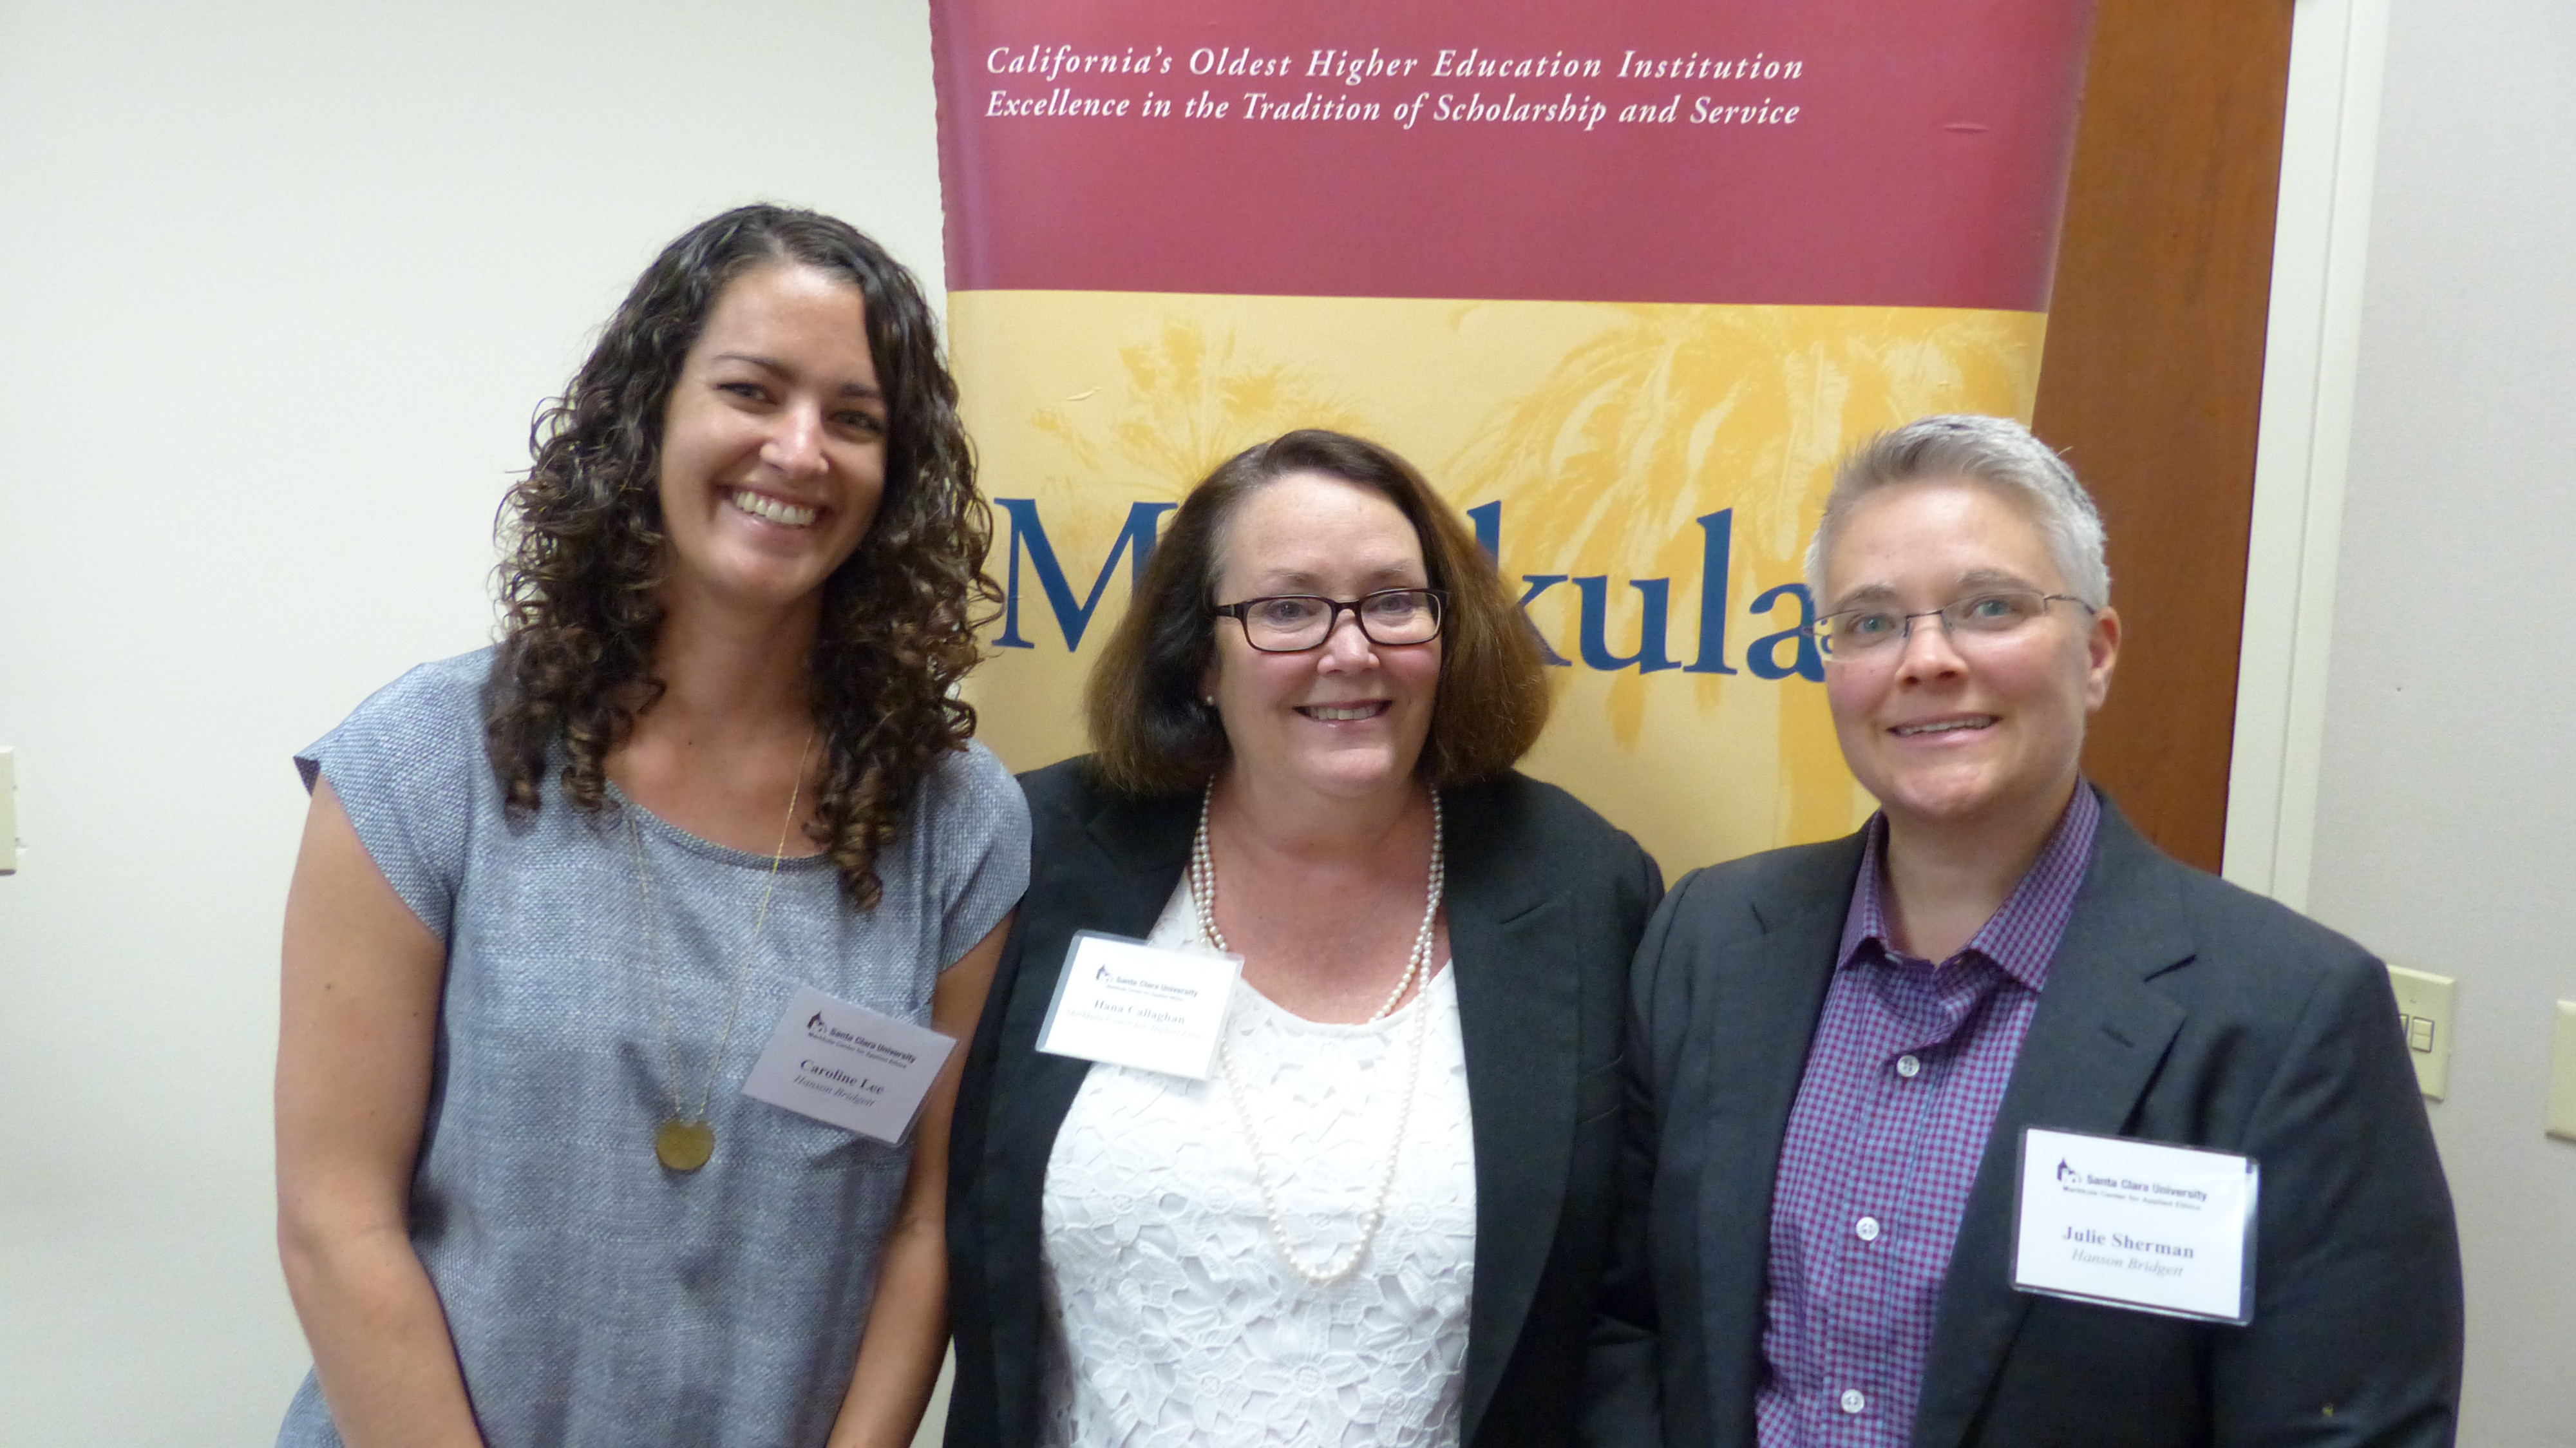 Hana Callaghan, Julie Sherman, and Caroline Lee at the August 21, 2015 Public Sector Roundtable